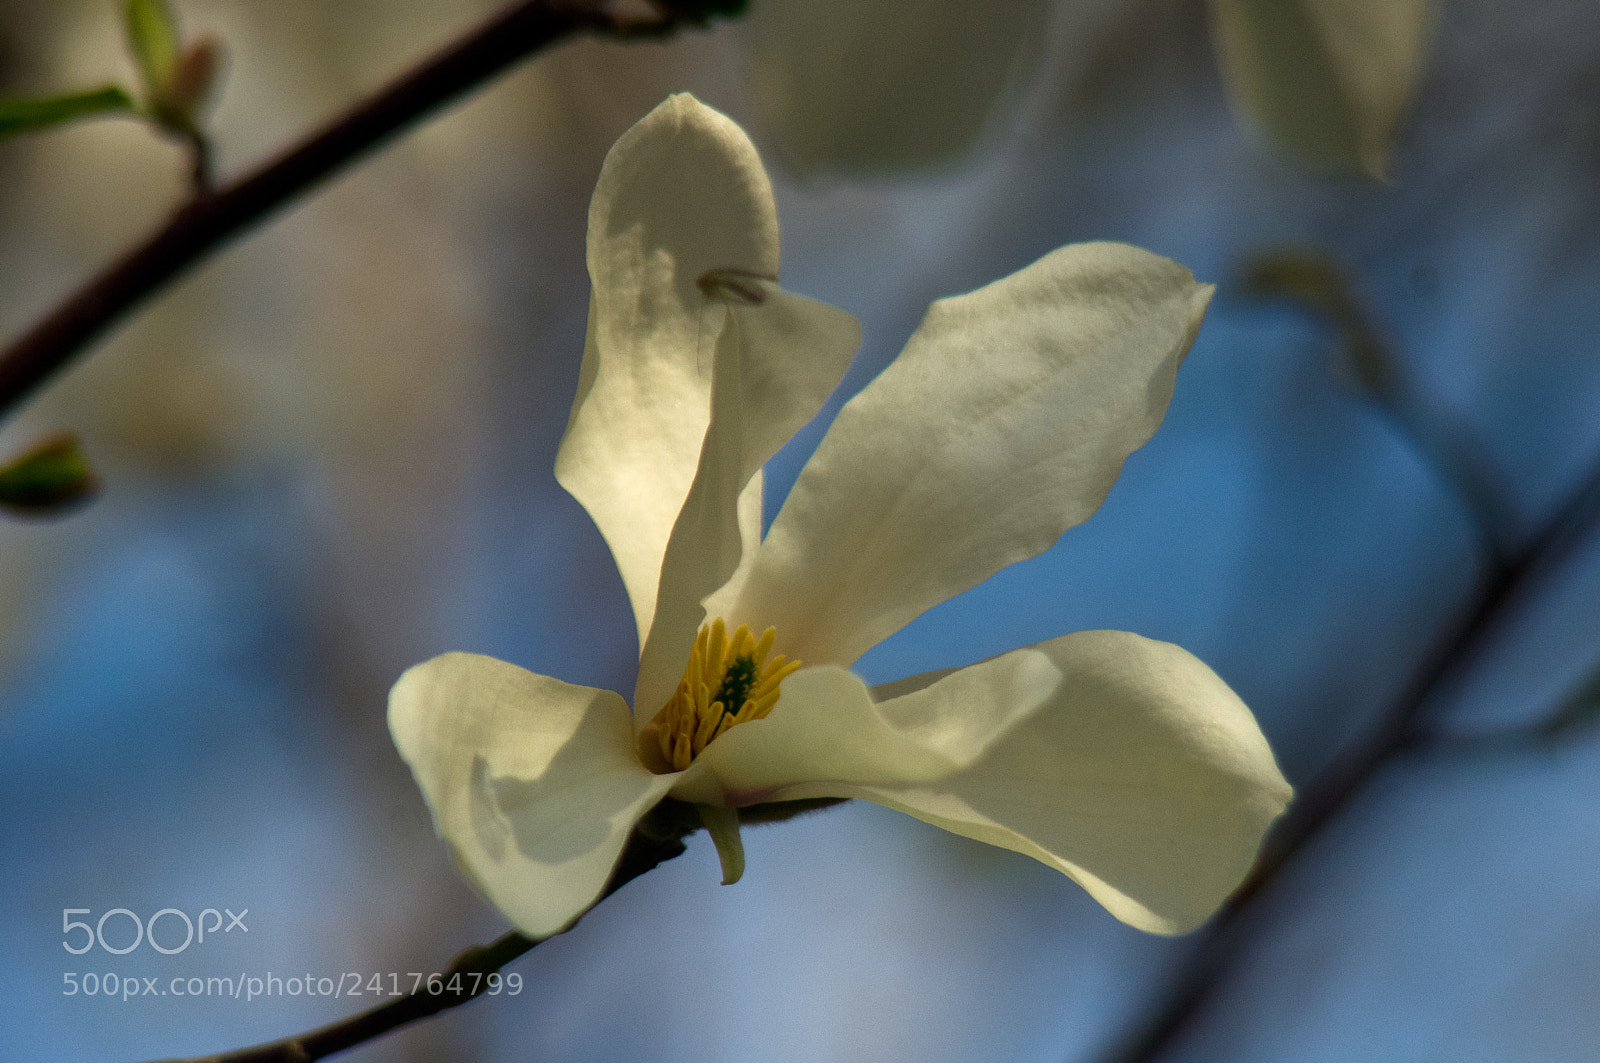 Pentax K-r sample photo. White magnolia blossom in photography